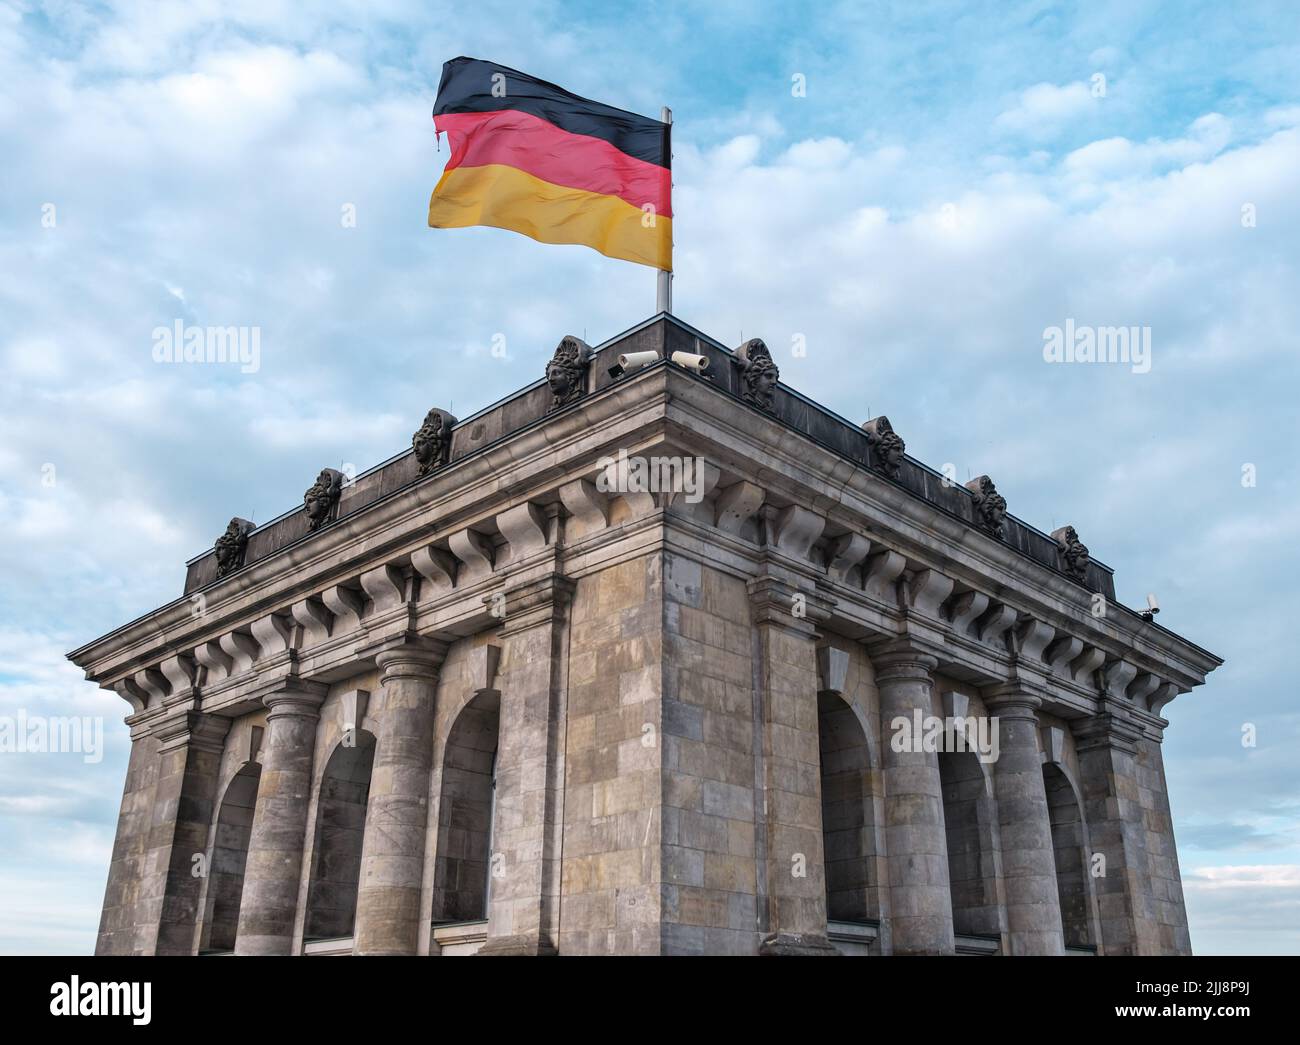 The German Flag Flying Atop The Reichstag In Berlin, Germany Stock Photo